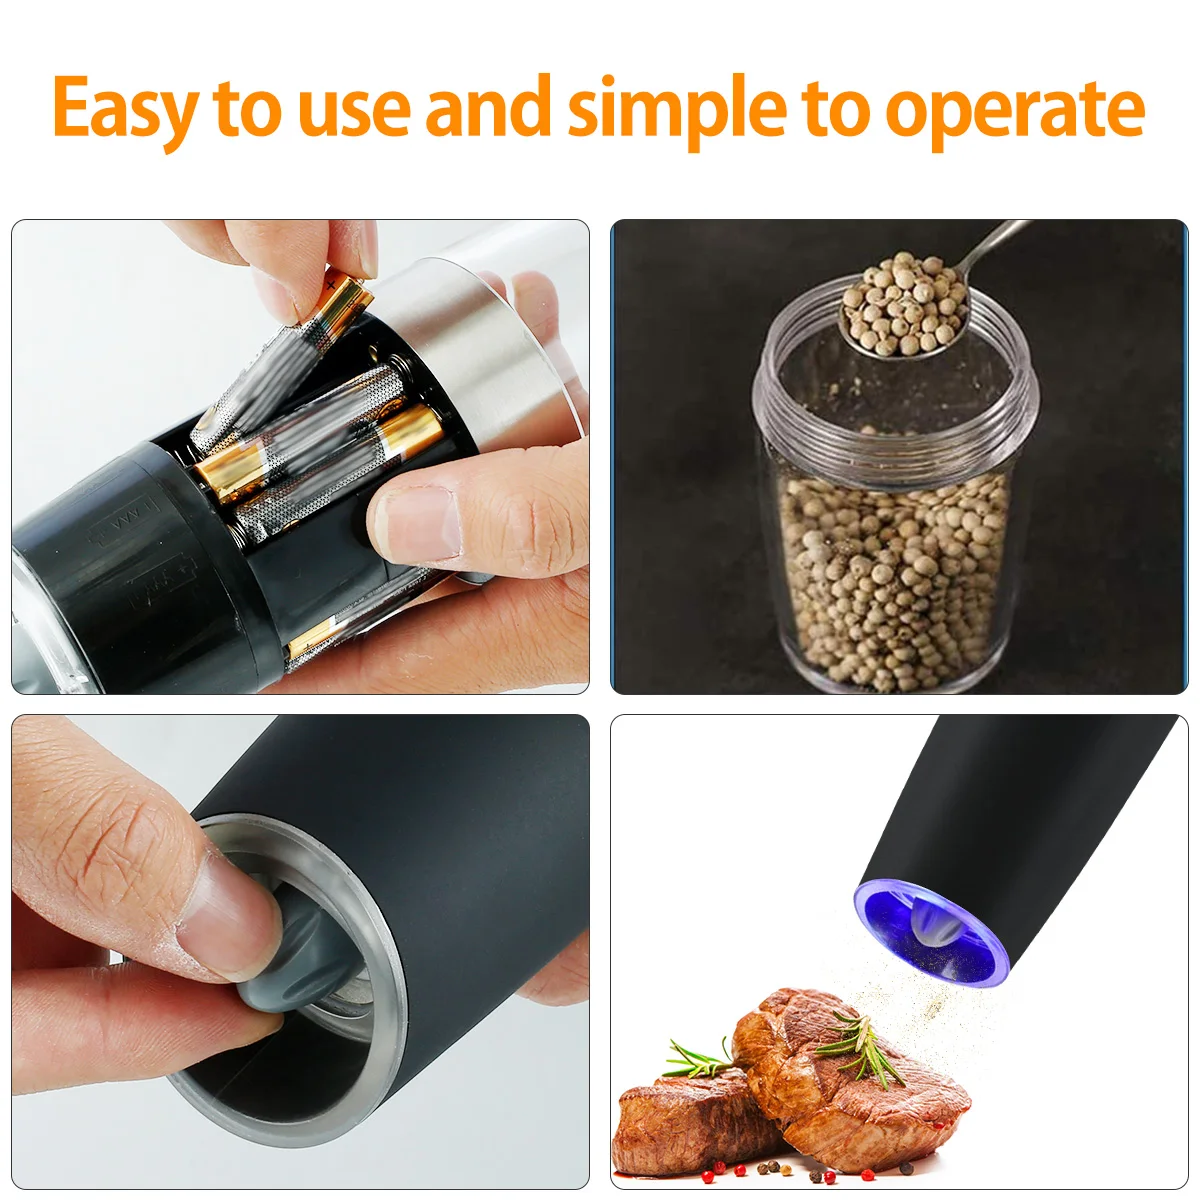 https://ae01.alicdn.com/kf/S5b048a0cd7a04ff688ac17e4d9cfcae8A/Electric-Pepper-Mill-Stainless-Steel-Automatic-Gravity-Shaker-Salt-and-Pepper-Herb-Spice-Grinder-Kitchen-Spice.jpg